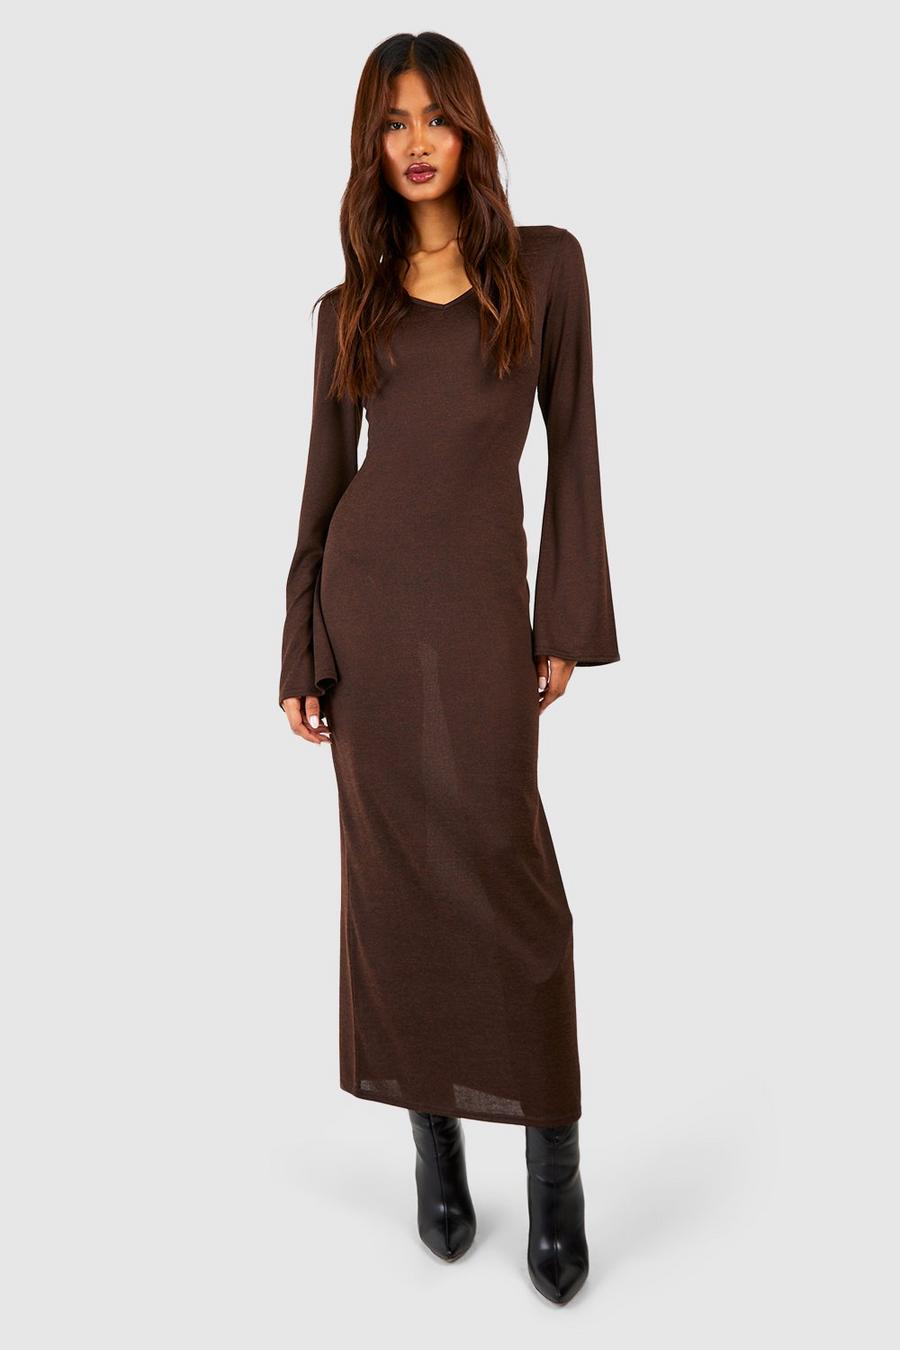 Chocolate Tall Lightweight Knitted V Neck Flare Sleev Midaxi Dress